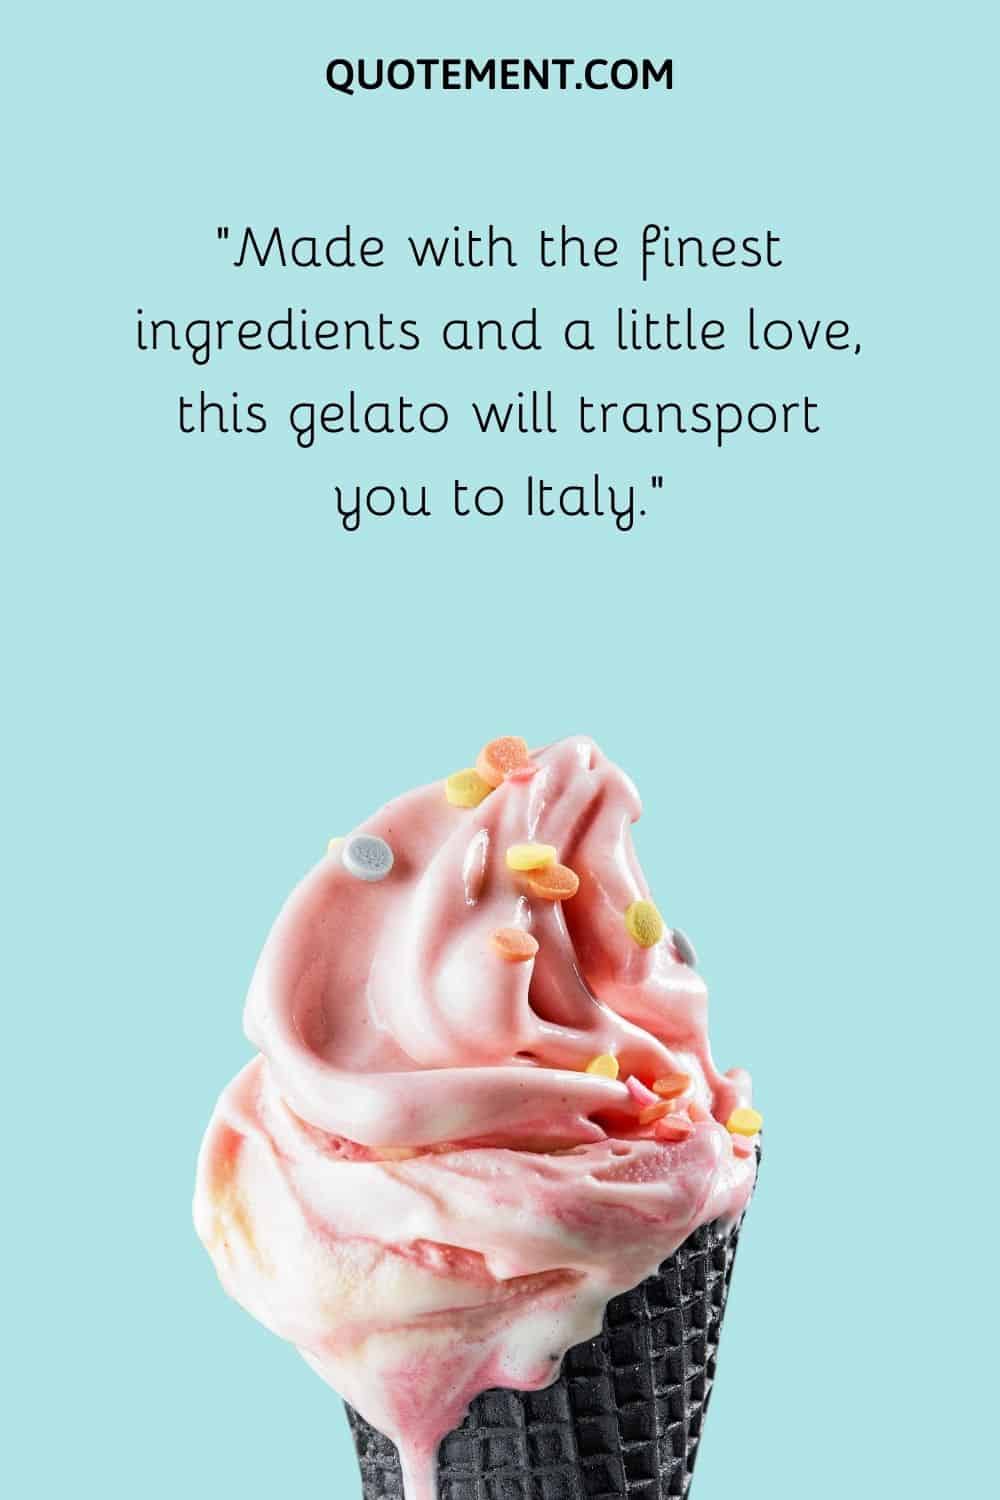 this gelato will transport you to Italy